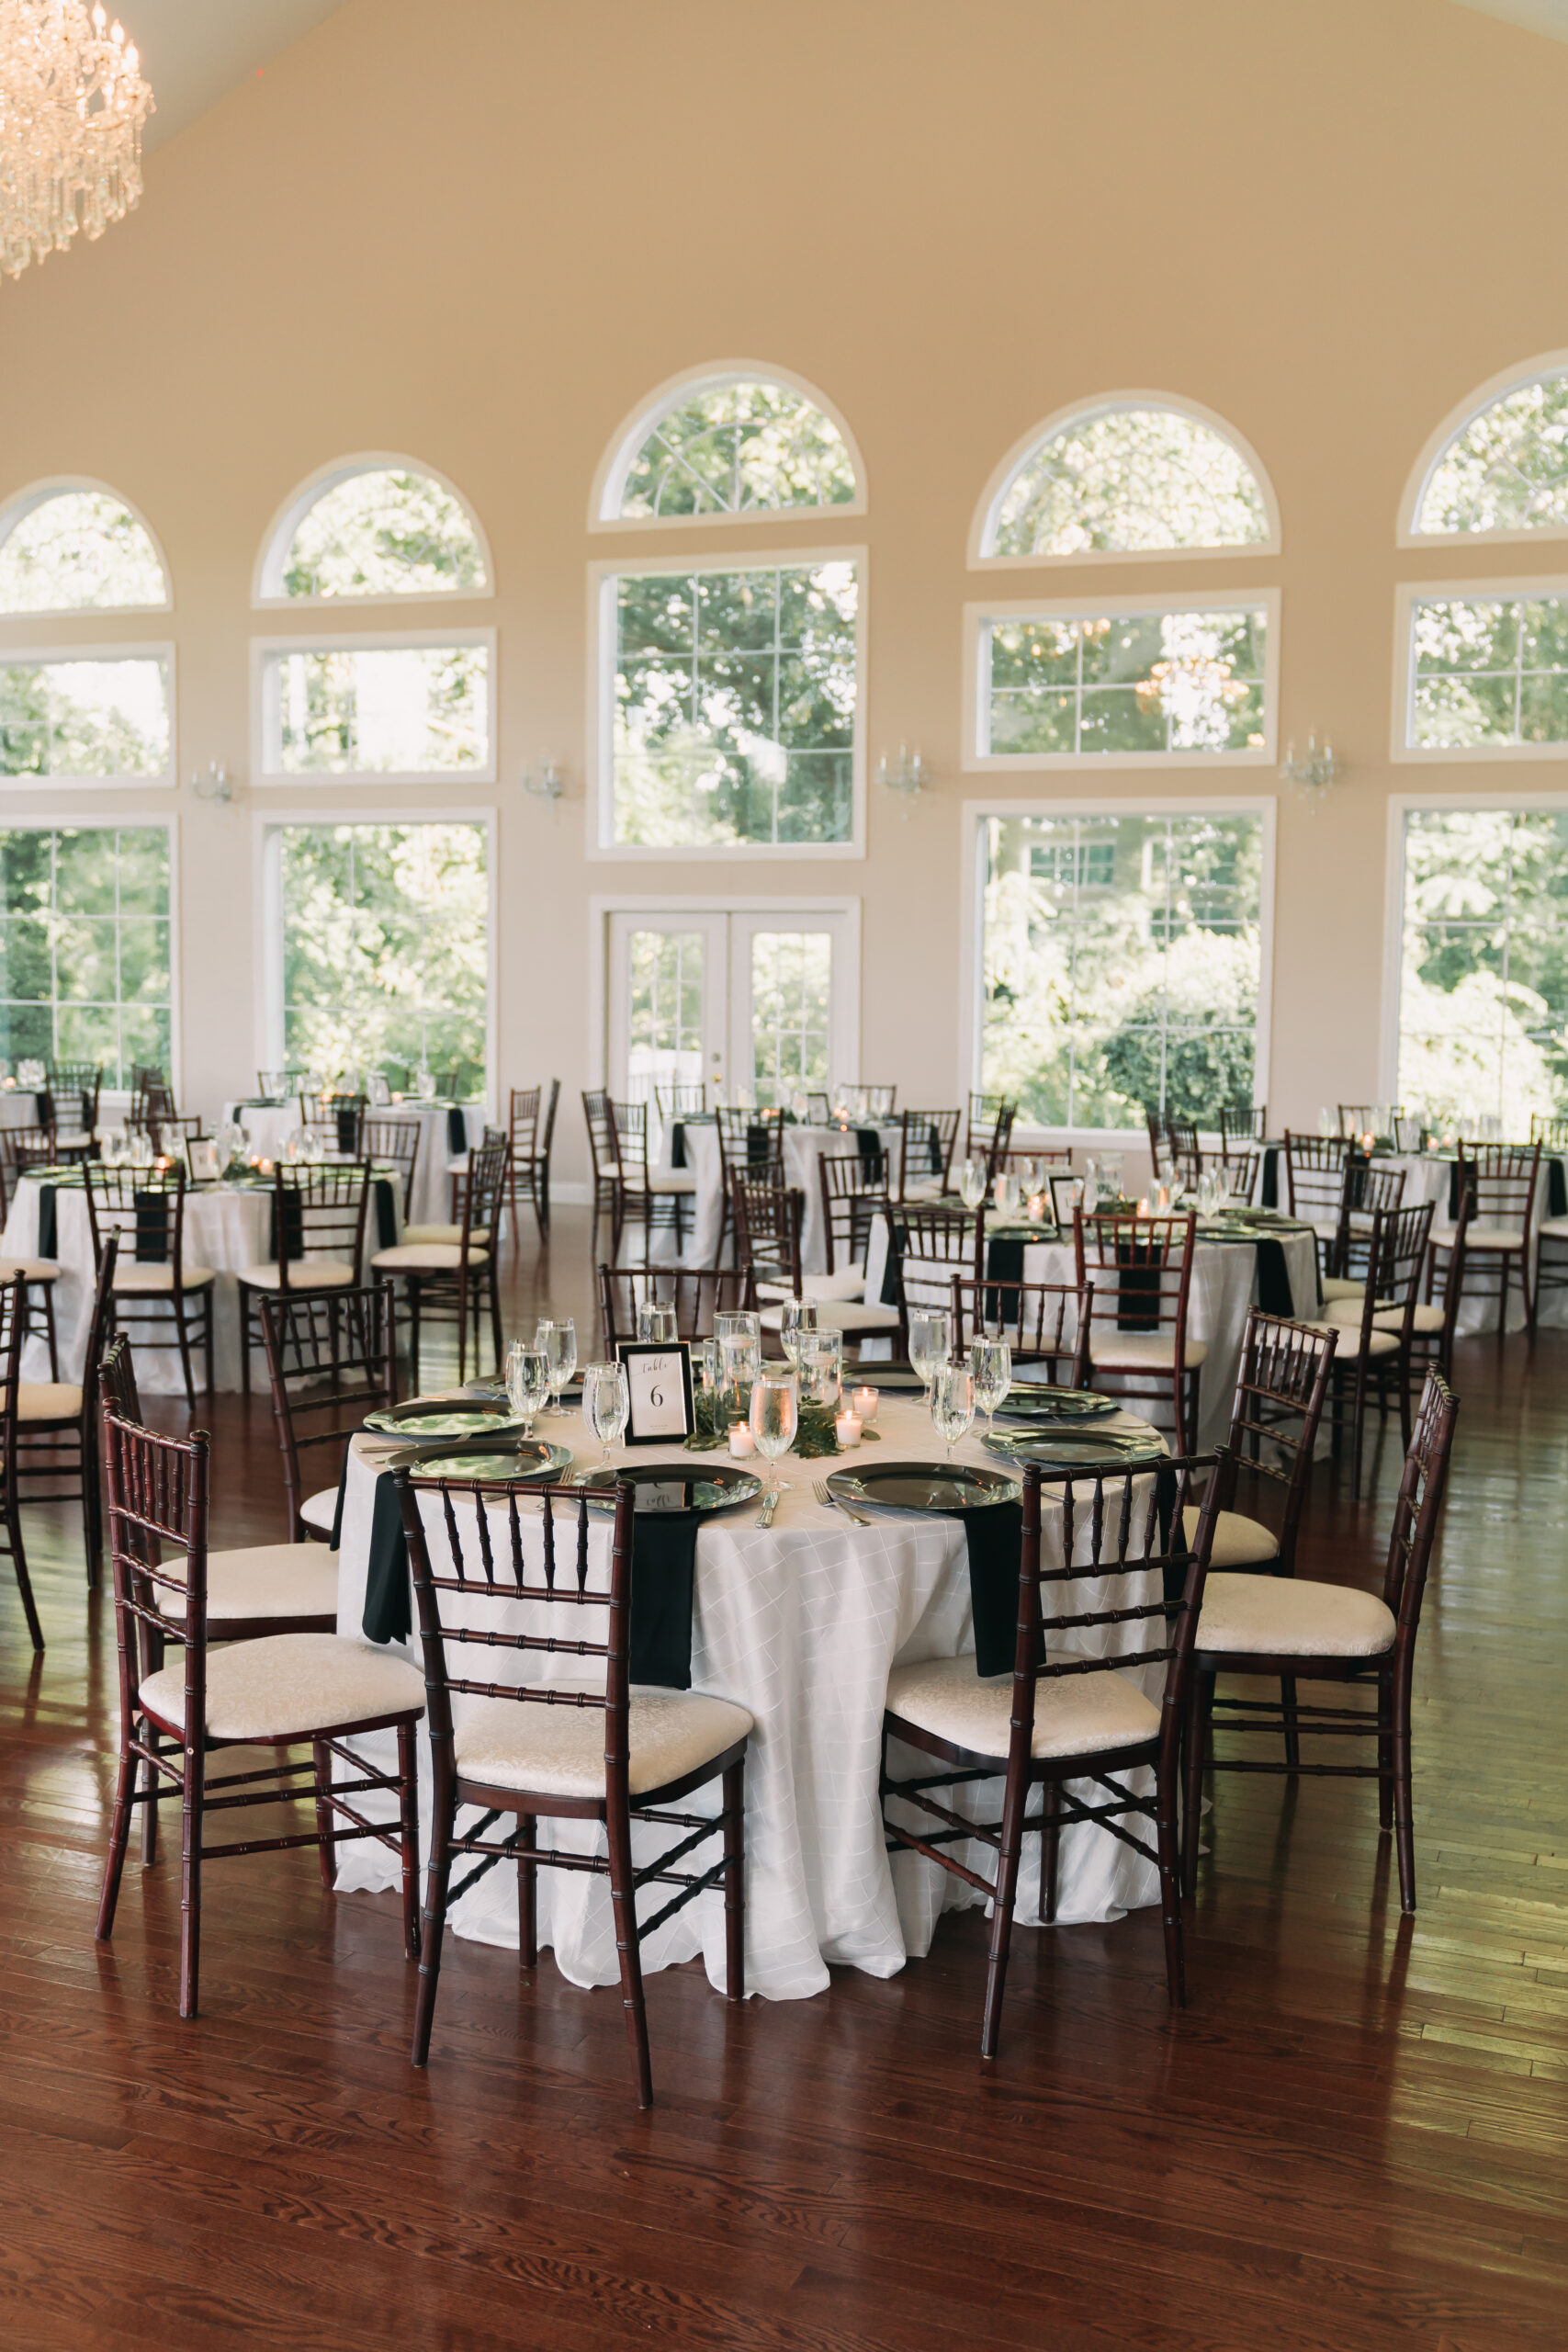 Overview of wedding reception venue with tables and tall windows, taken by Rachel Yearick Photography